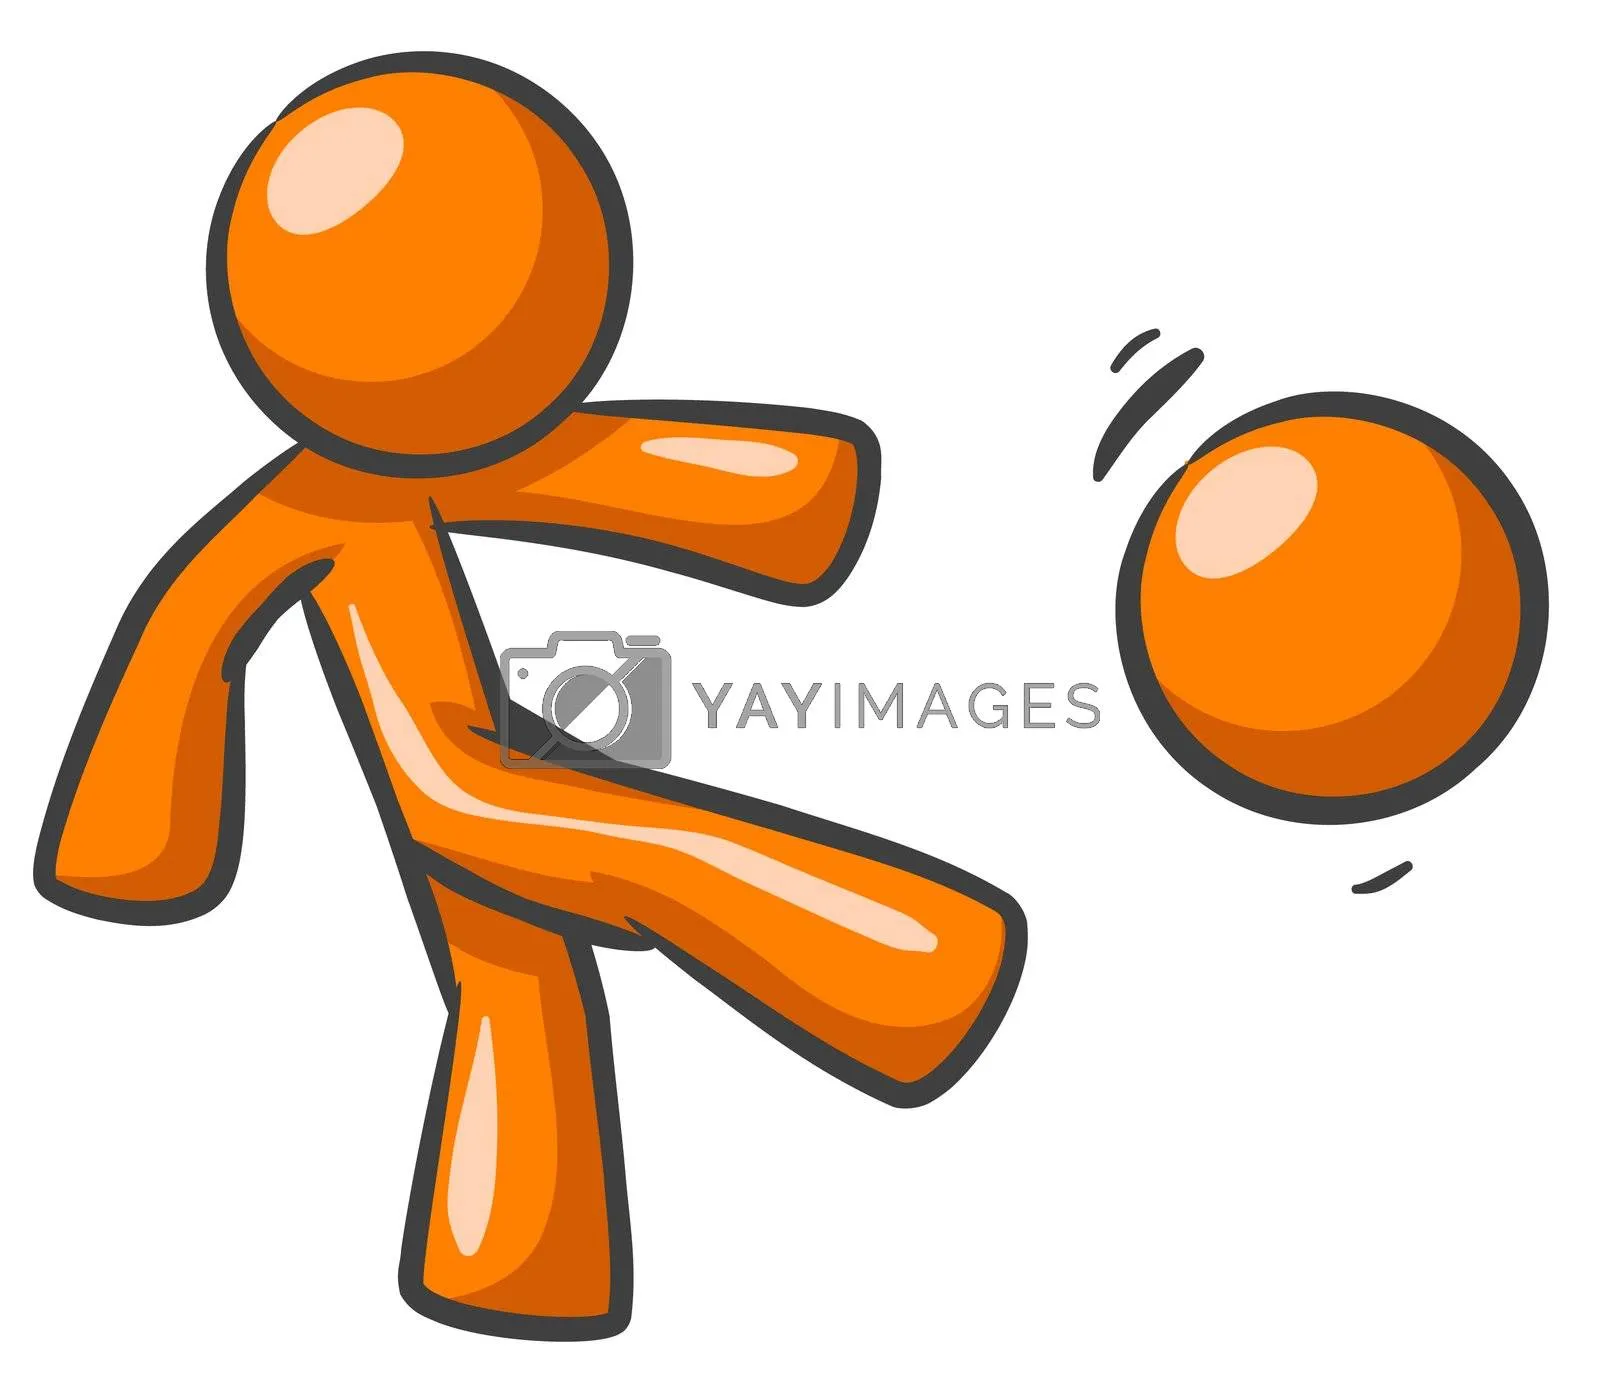 Orange Man Kicking Ball by LeoBlanchette Vectors & Illustrations Free  download - Yayimages